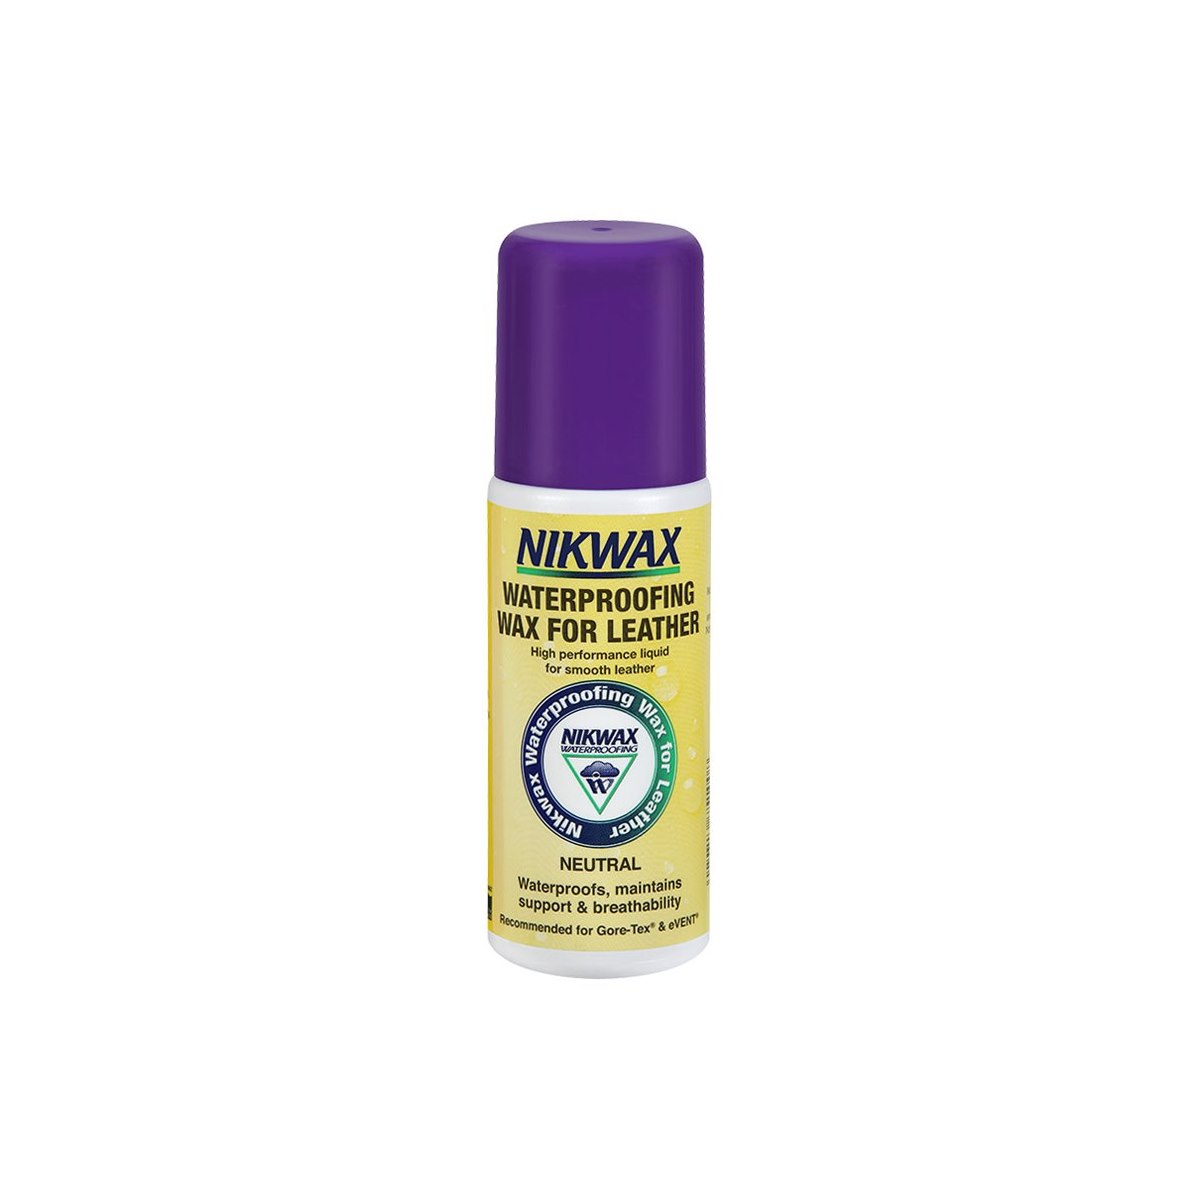 Nikwax Waterproofing Wax for Leather Neutral